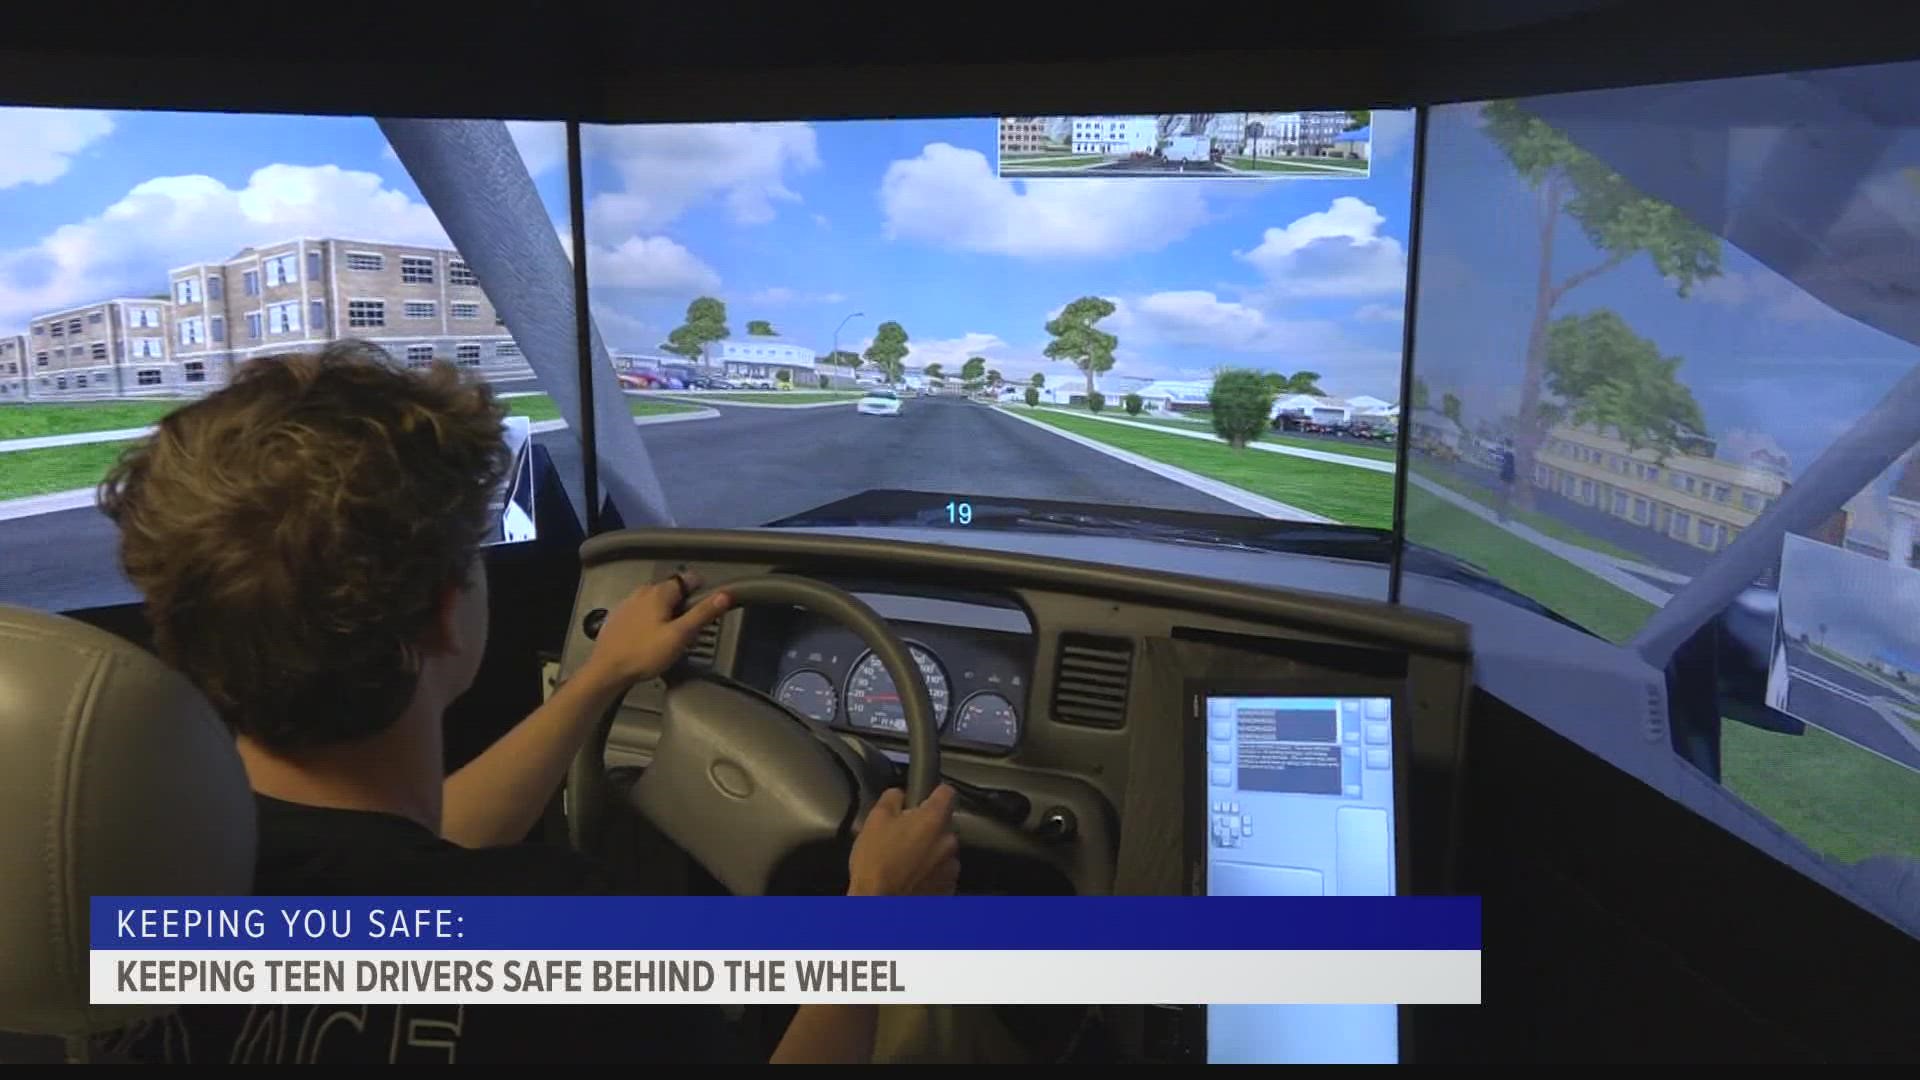 There's specialty road safety training for teenagers in the Valley at Driving MBA and as National Teen Driver's Safety Week approaches, families are taking advantage